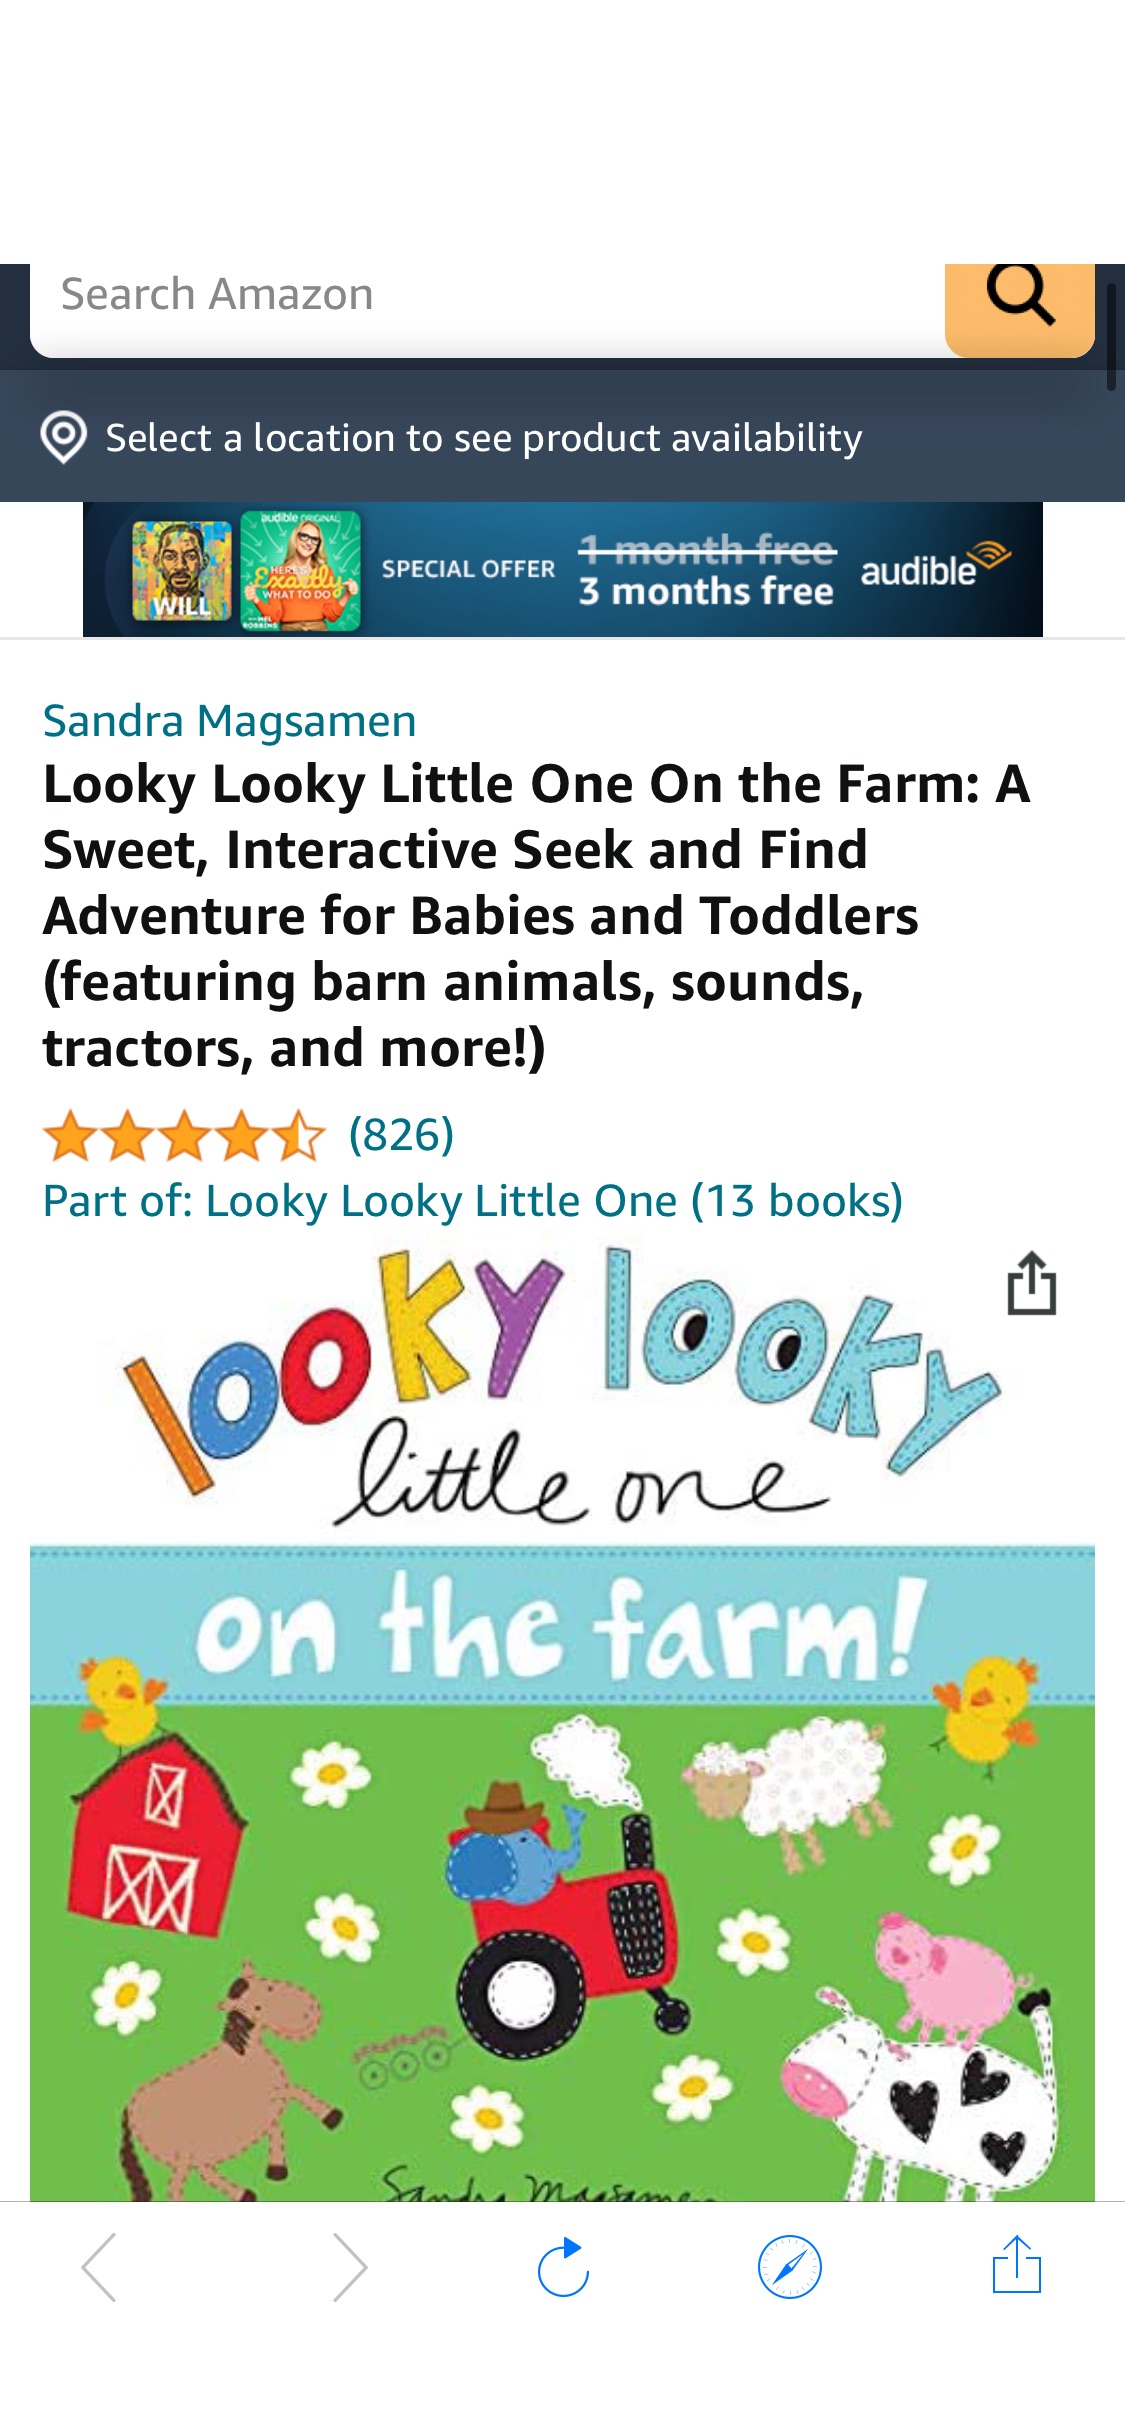 Looky Looky Little One On the Farm: A Sweet, Interactive Seek and Find Adventure for Babies and Toddlers (featuring barn animals, sounds, tractorSandra: 9781728214092书: Amazon.com: Books